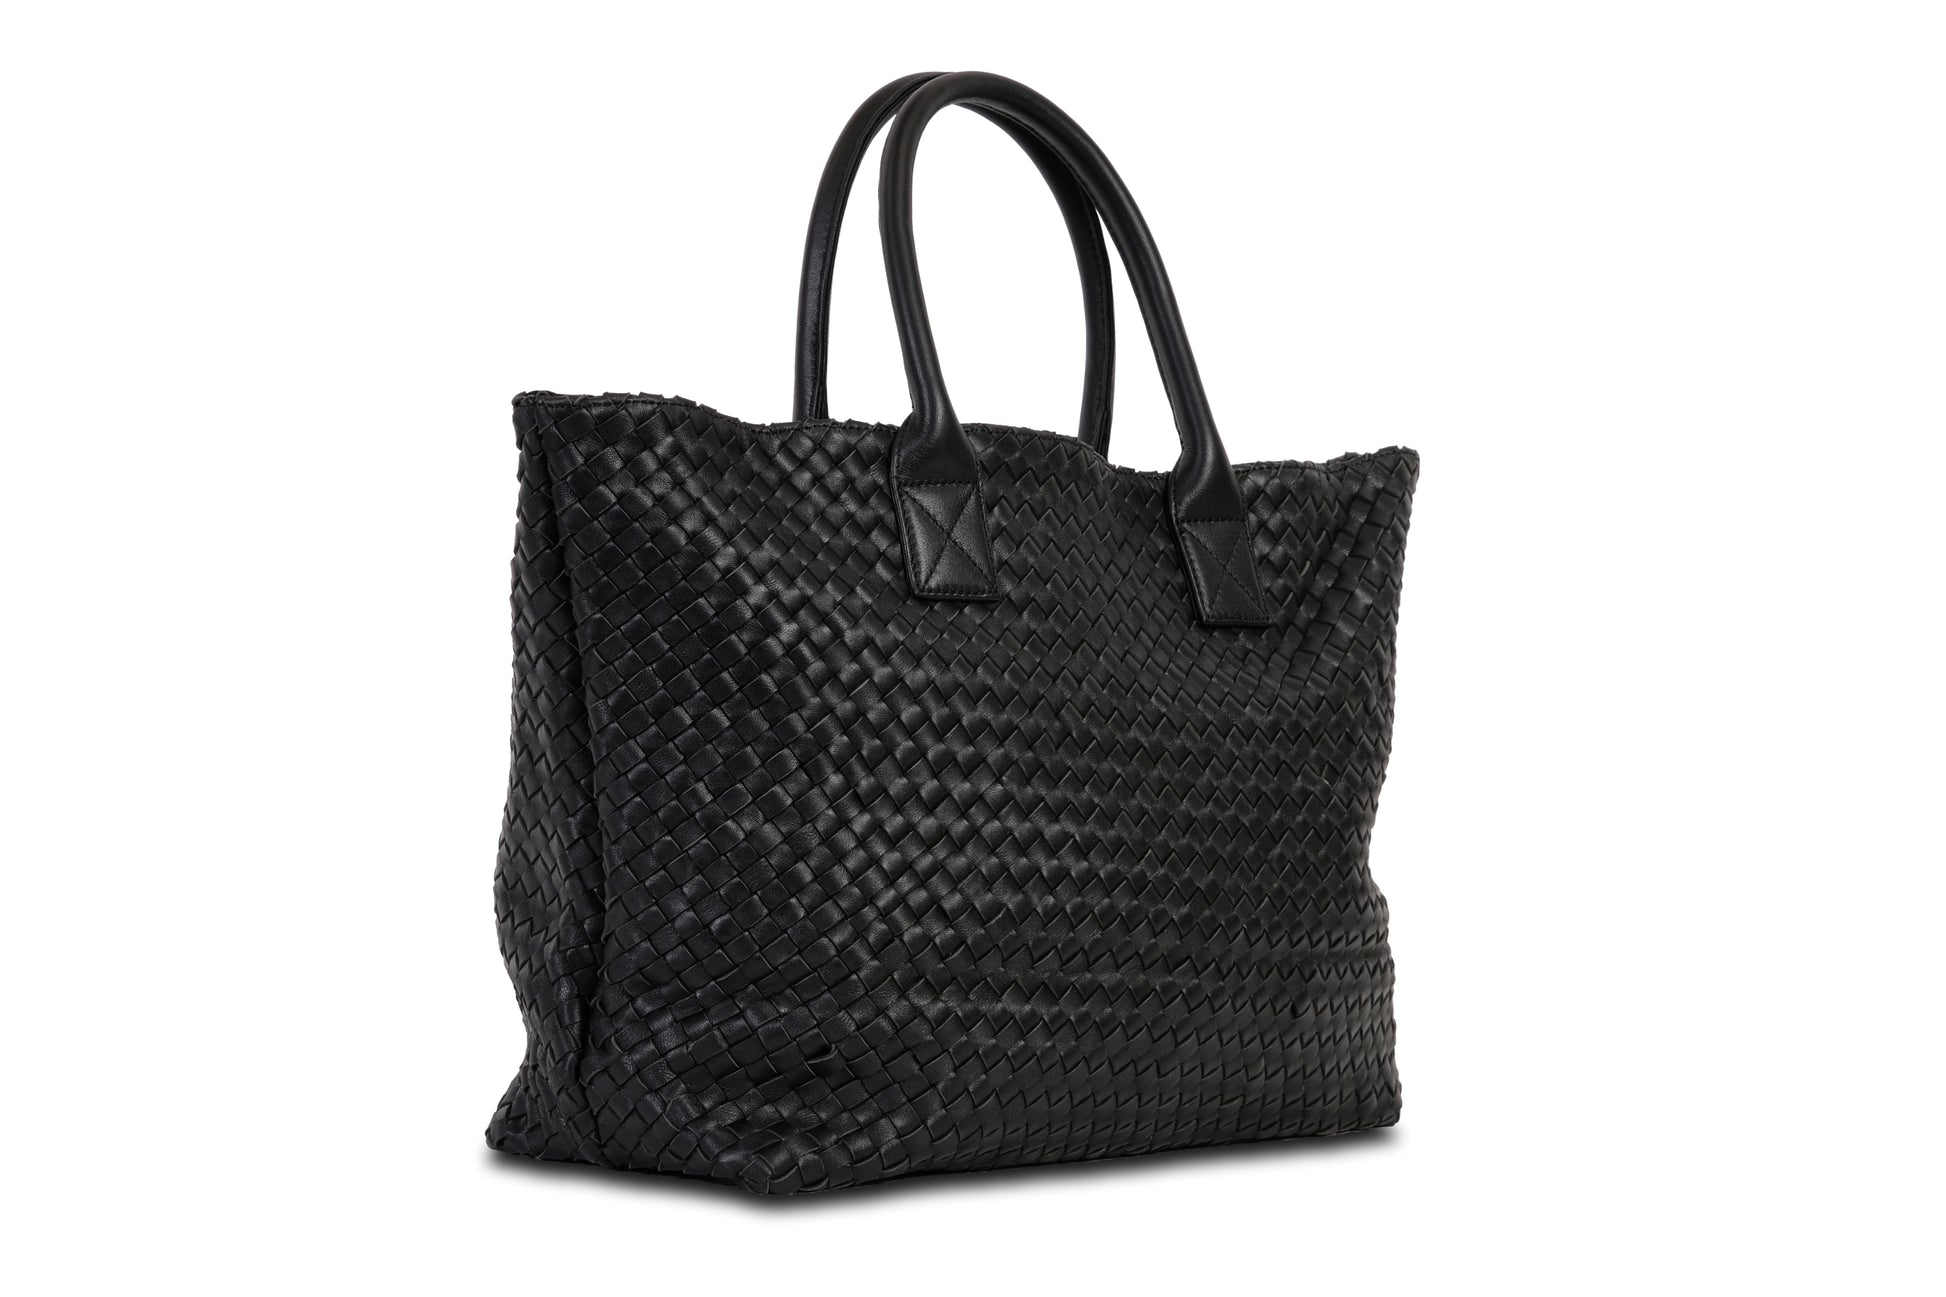 Destarina Midnight Black Crosshatch Leather Tote Bag Handbag made by Dewi Maya side view available at the best boutique in Upstate South Carolina Spartanburg Greenville Dewi Maya Boutique